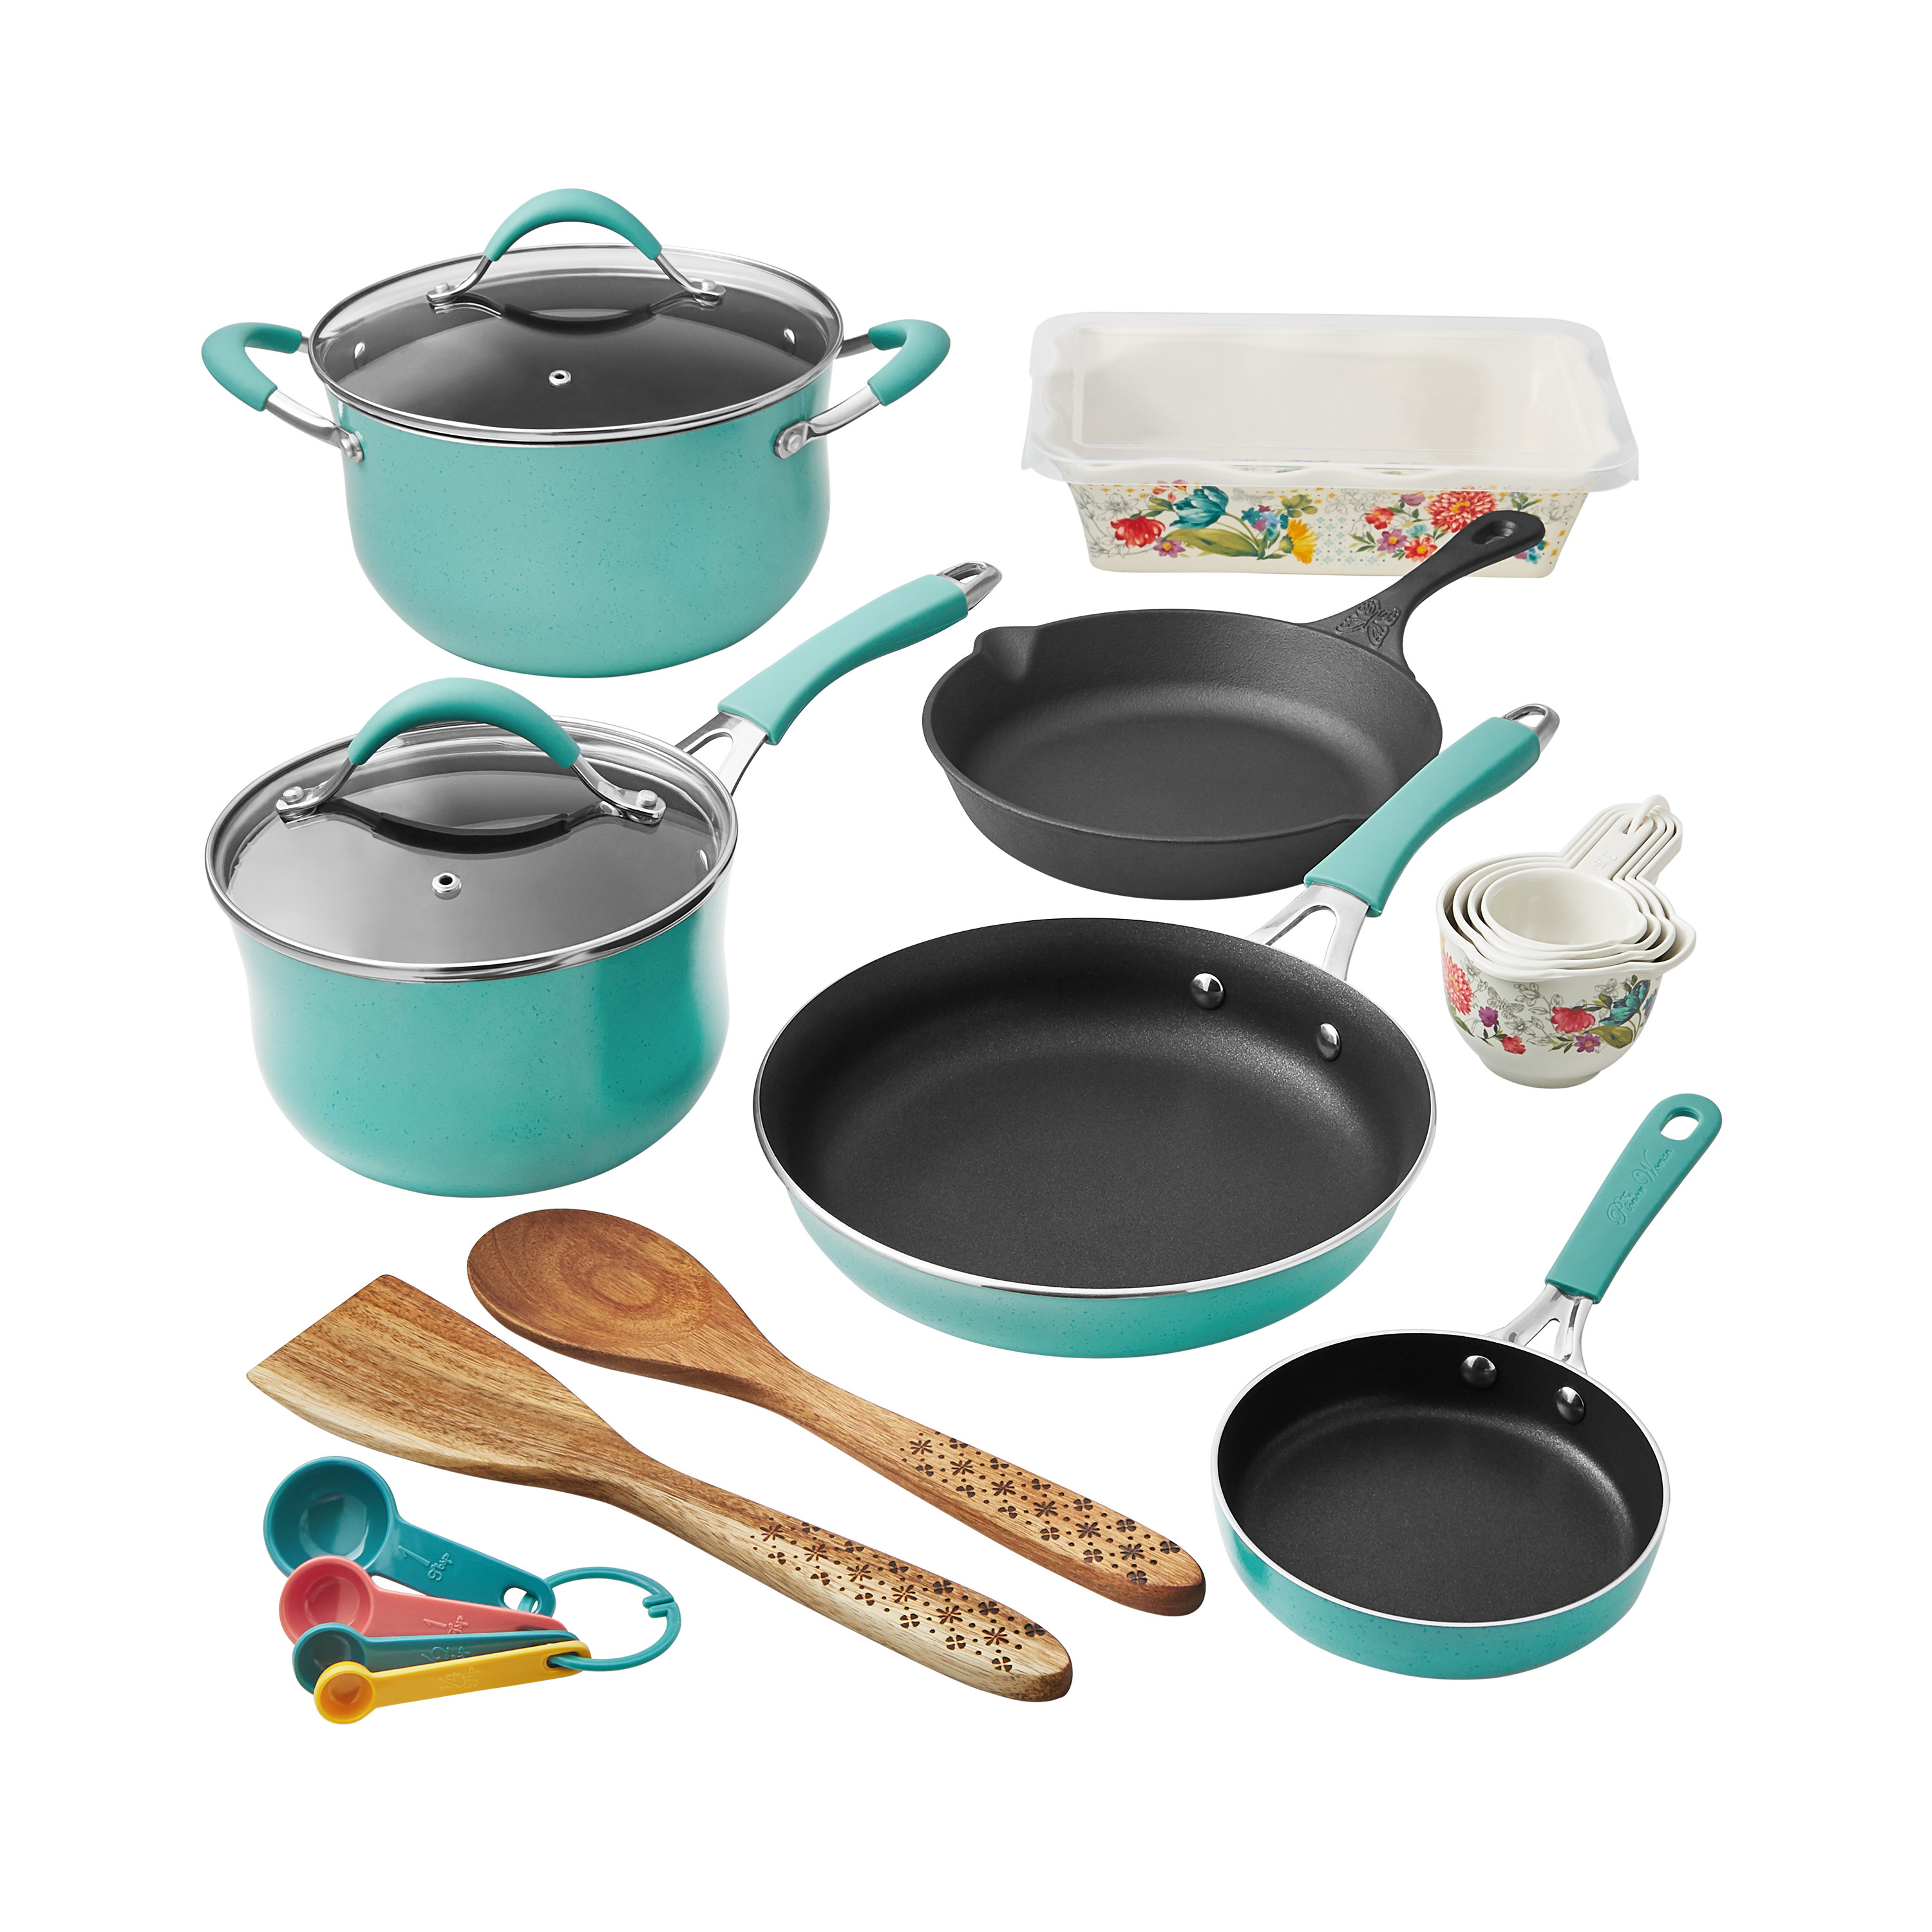 The Pioneer Woman Blooming Bouquet Aluminum Nonstick 19-Piece Cookware Set, Teal - image 1 of 11